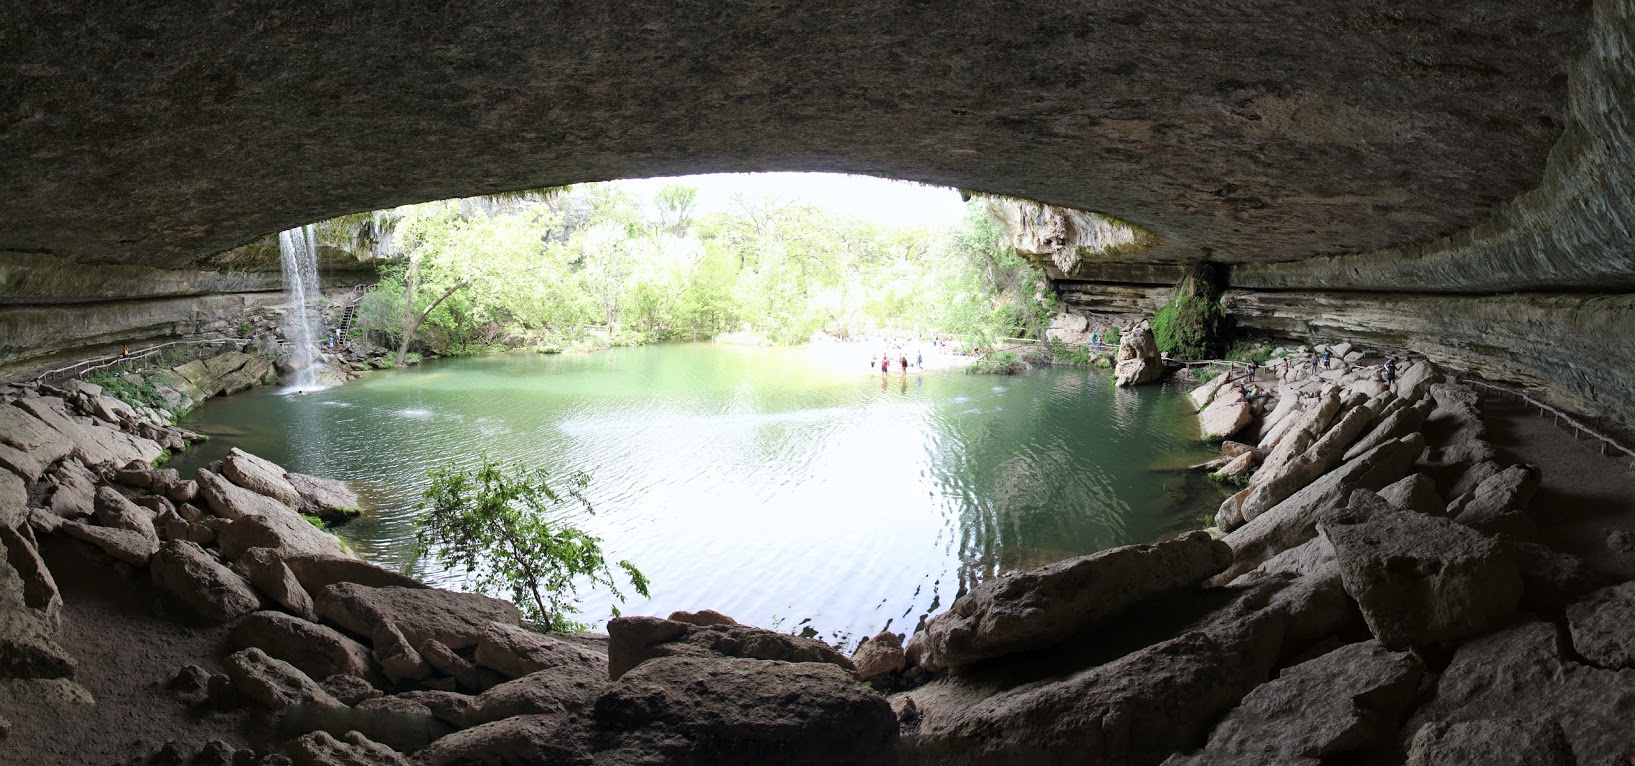 Hamilton pool in its entire beauty